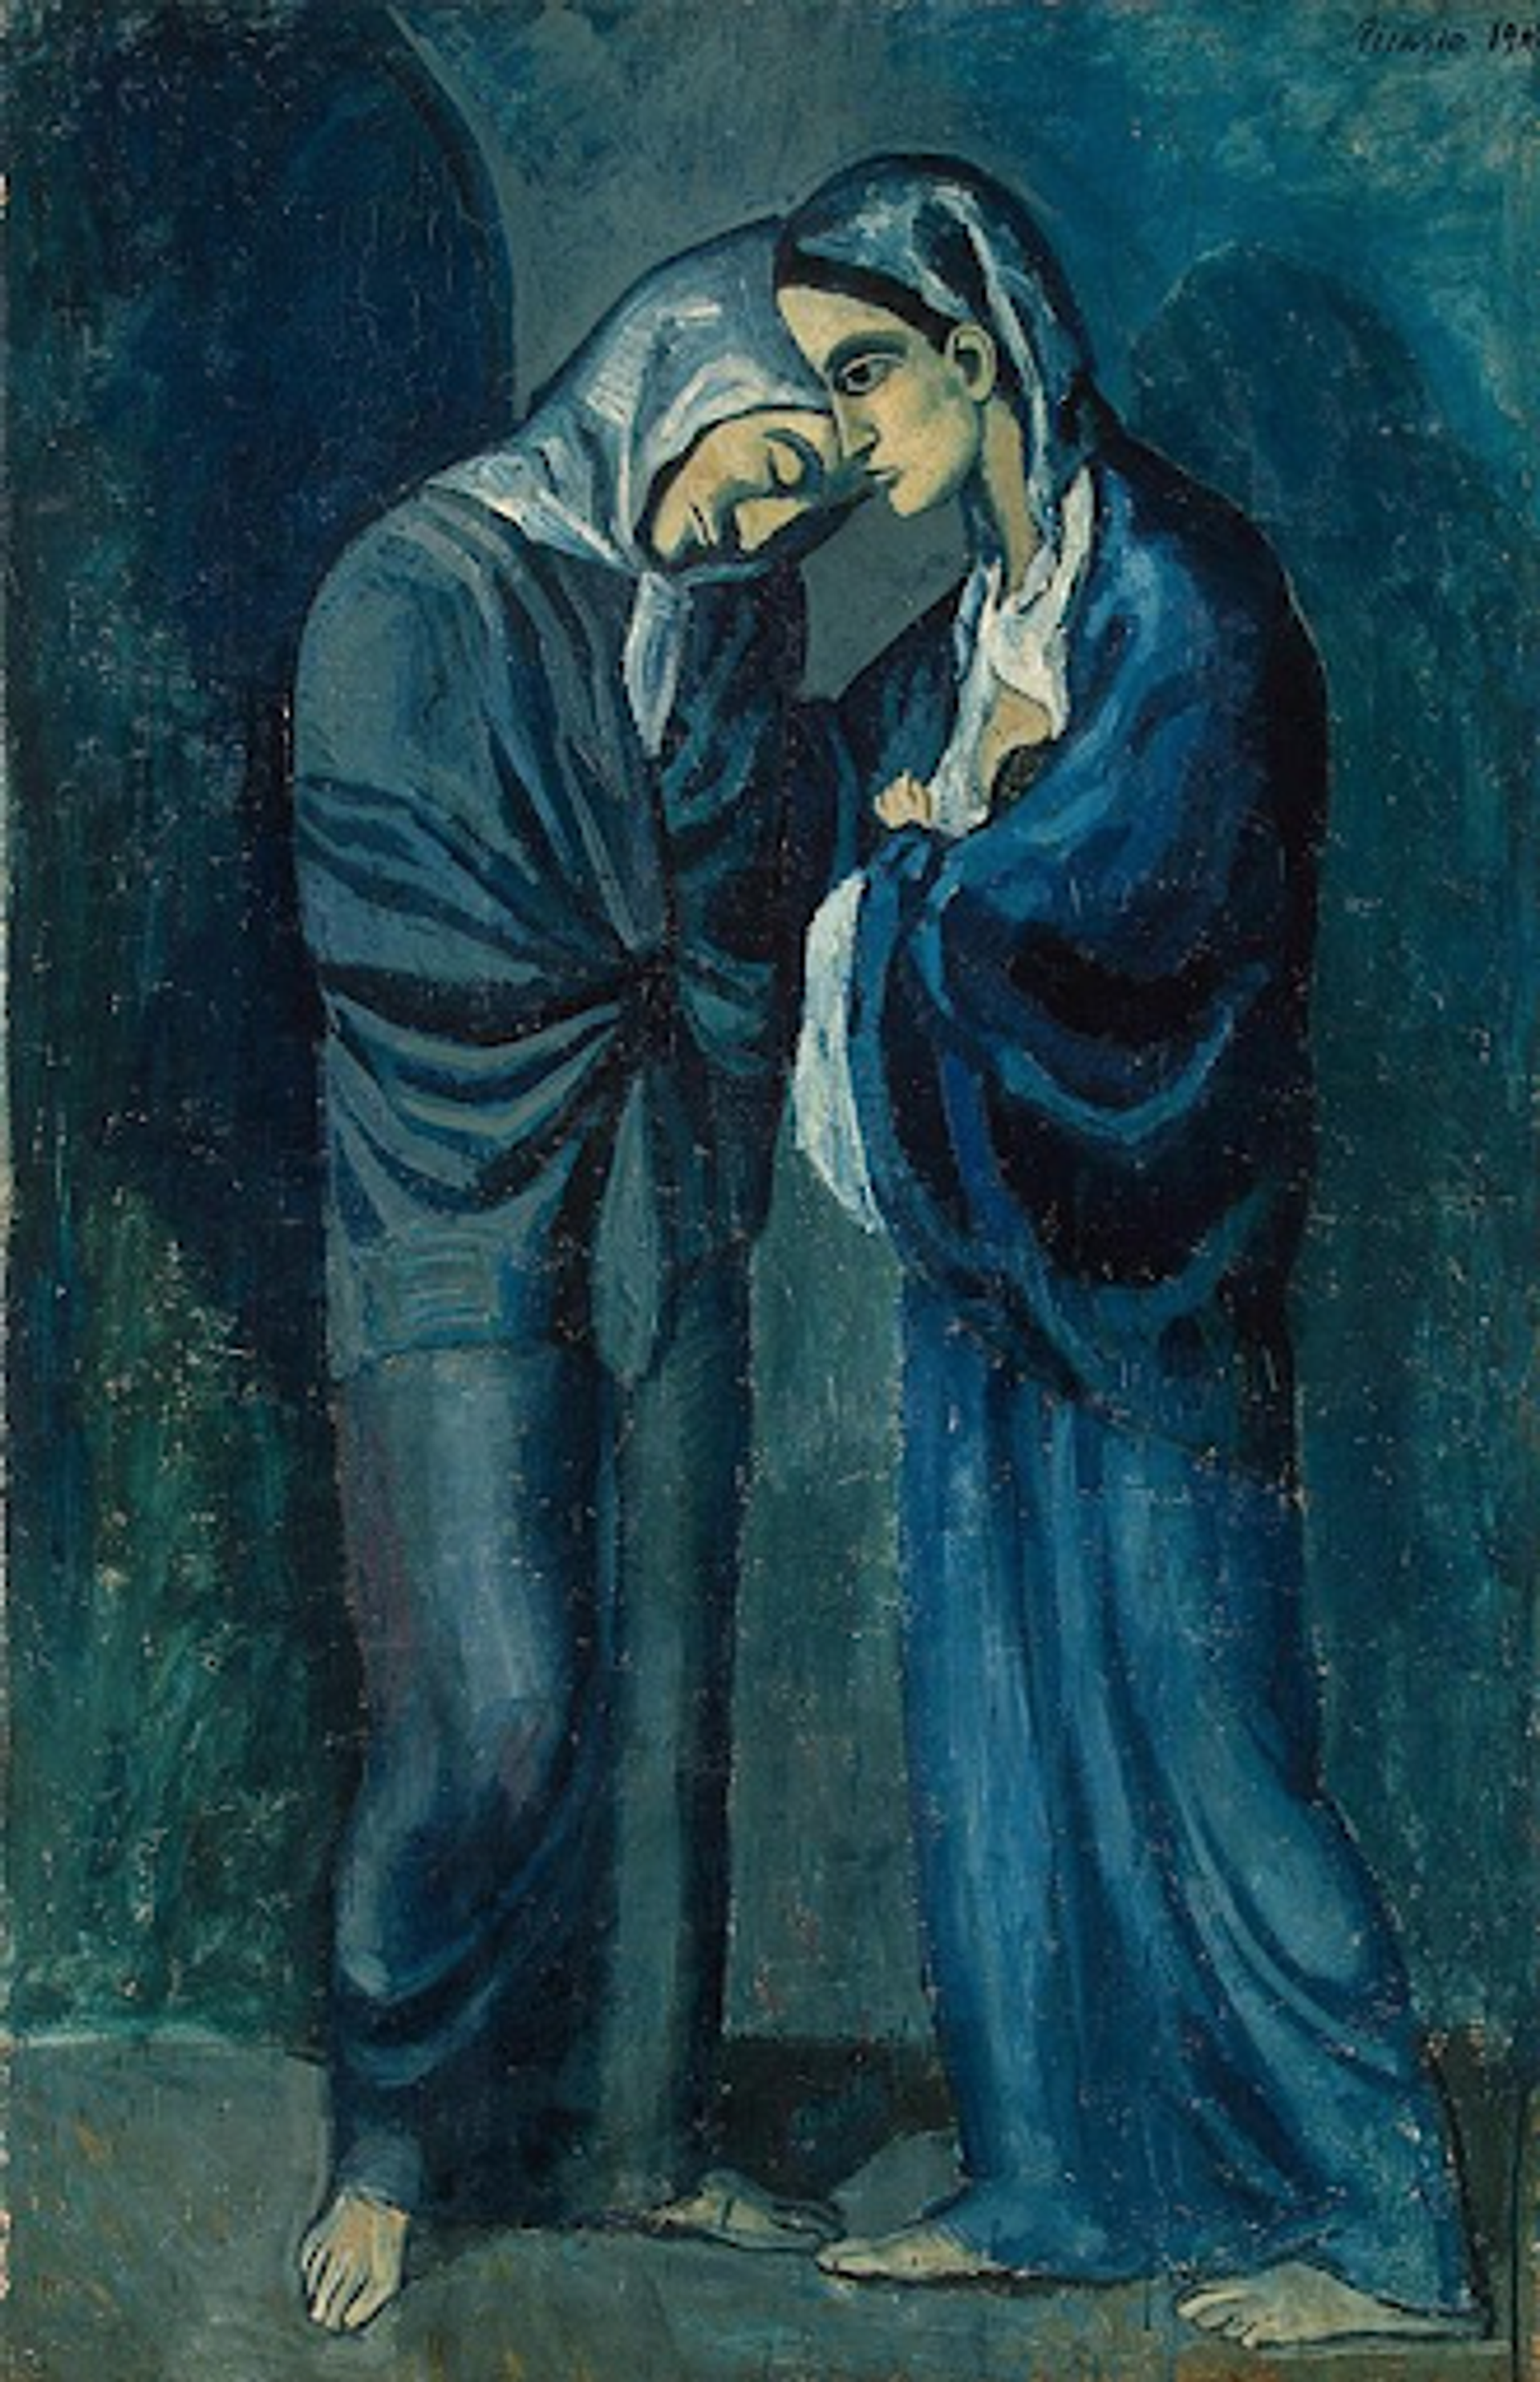 Pablo Picasso’s L’Entrevue. A Blue Period painting of two women, dressed in blue standing in front of one another, against a blue wall. 